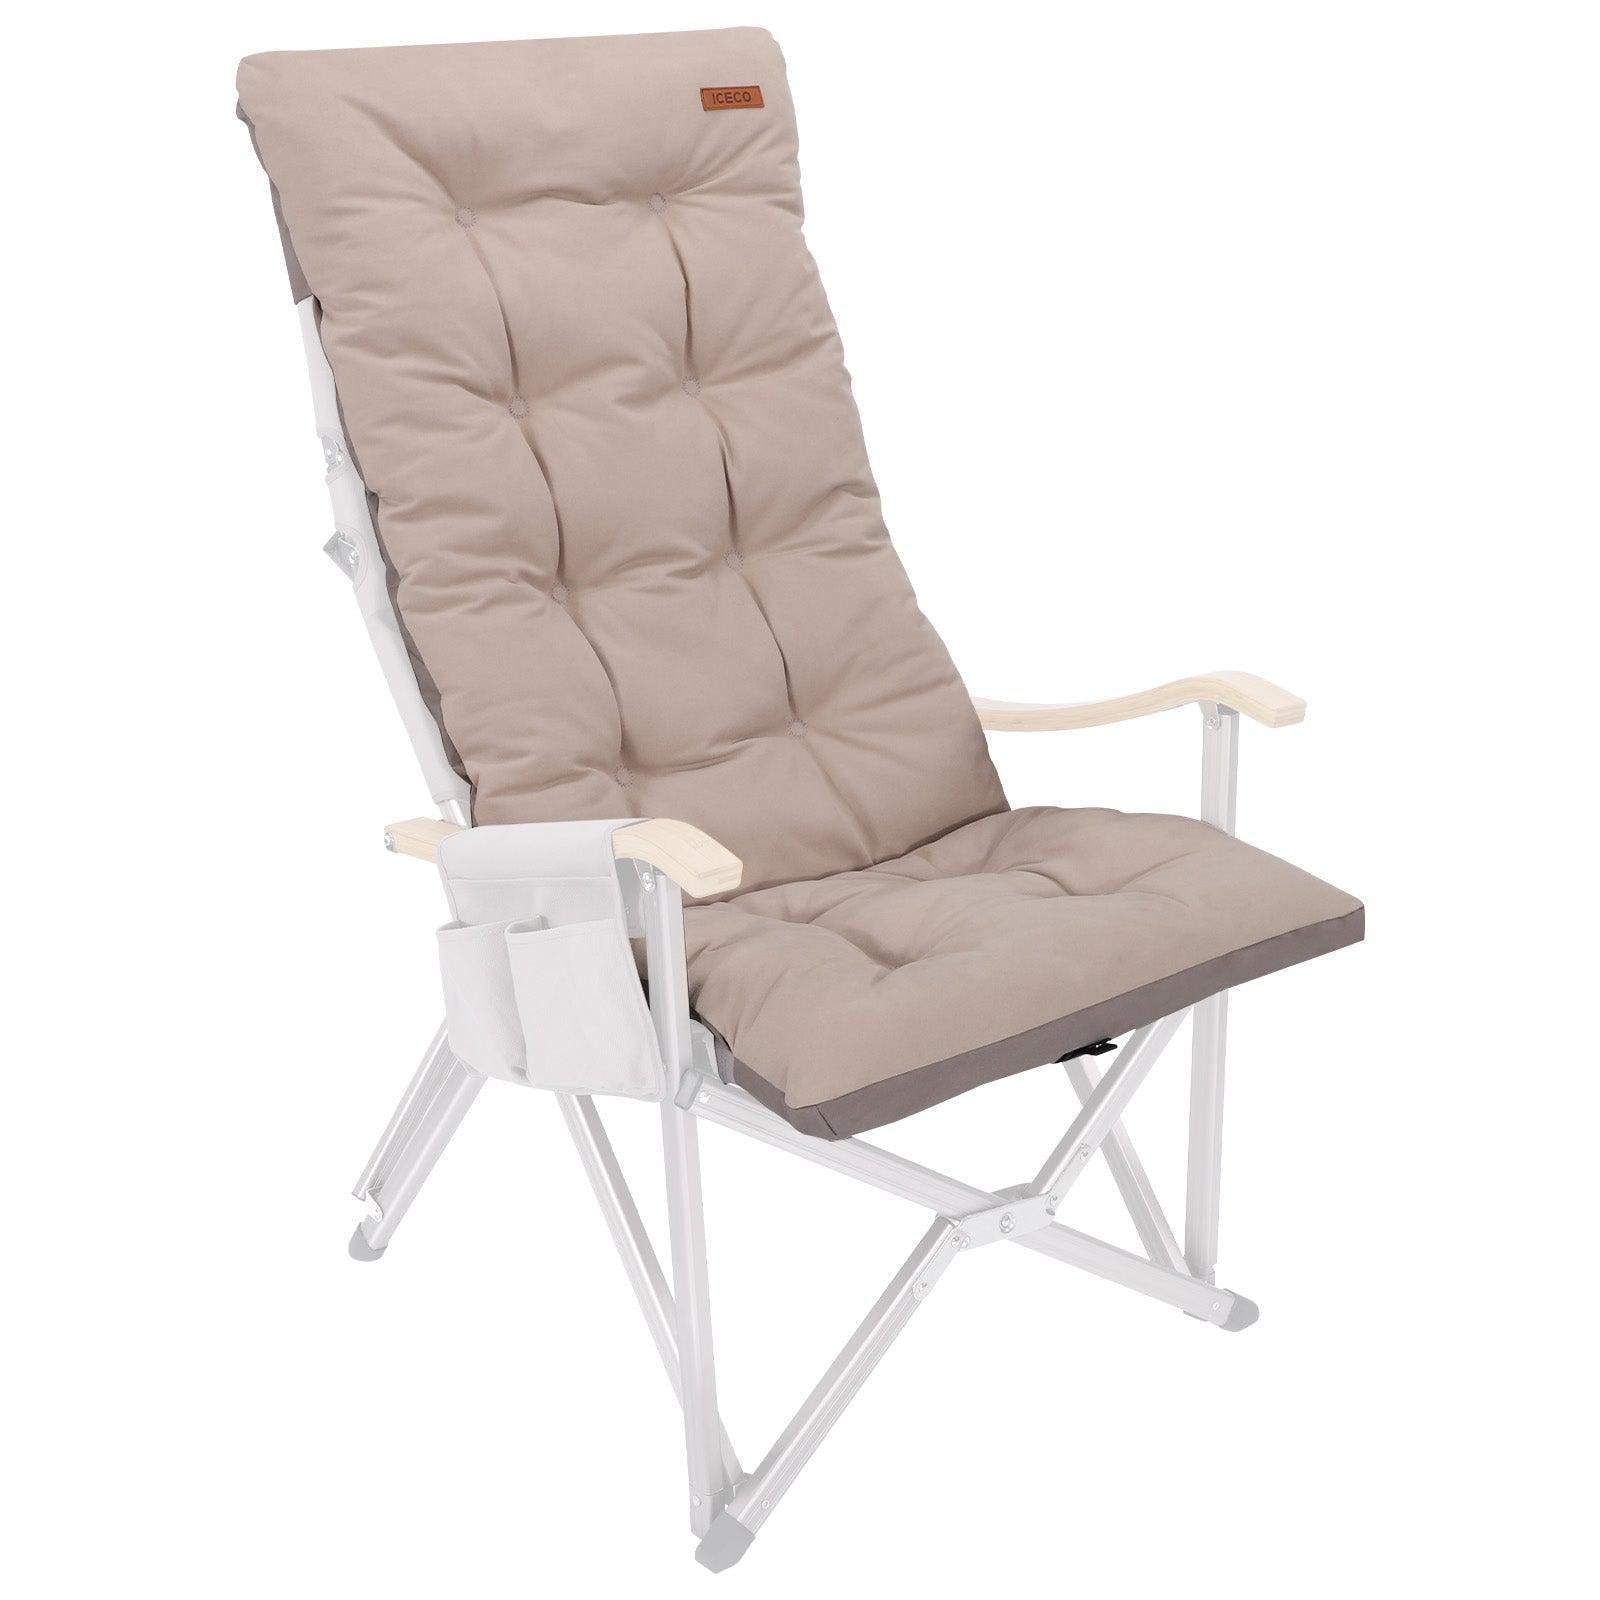 New!Plush Cushion for High-Back Camping Chair | ICECO